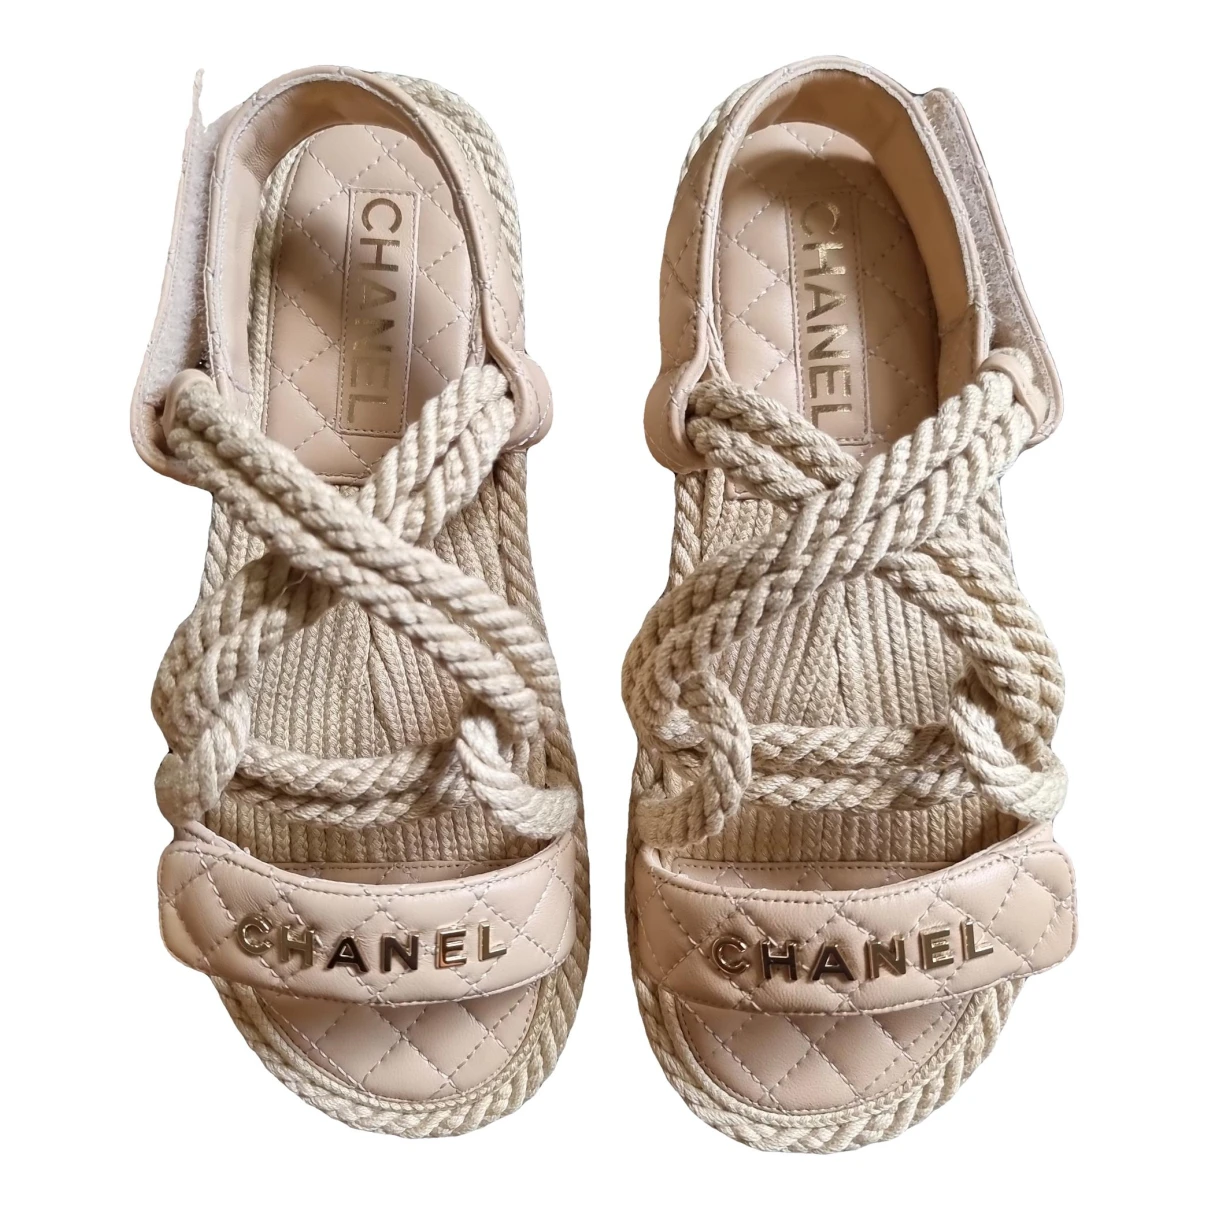 shoes Chanel sandals for Female Leather 38 EU. Used condition